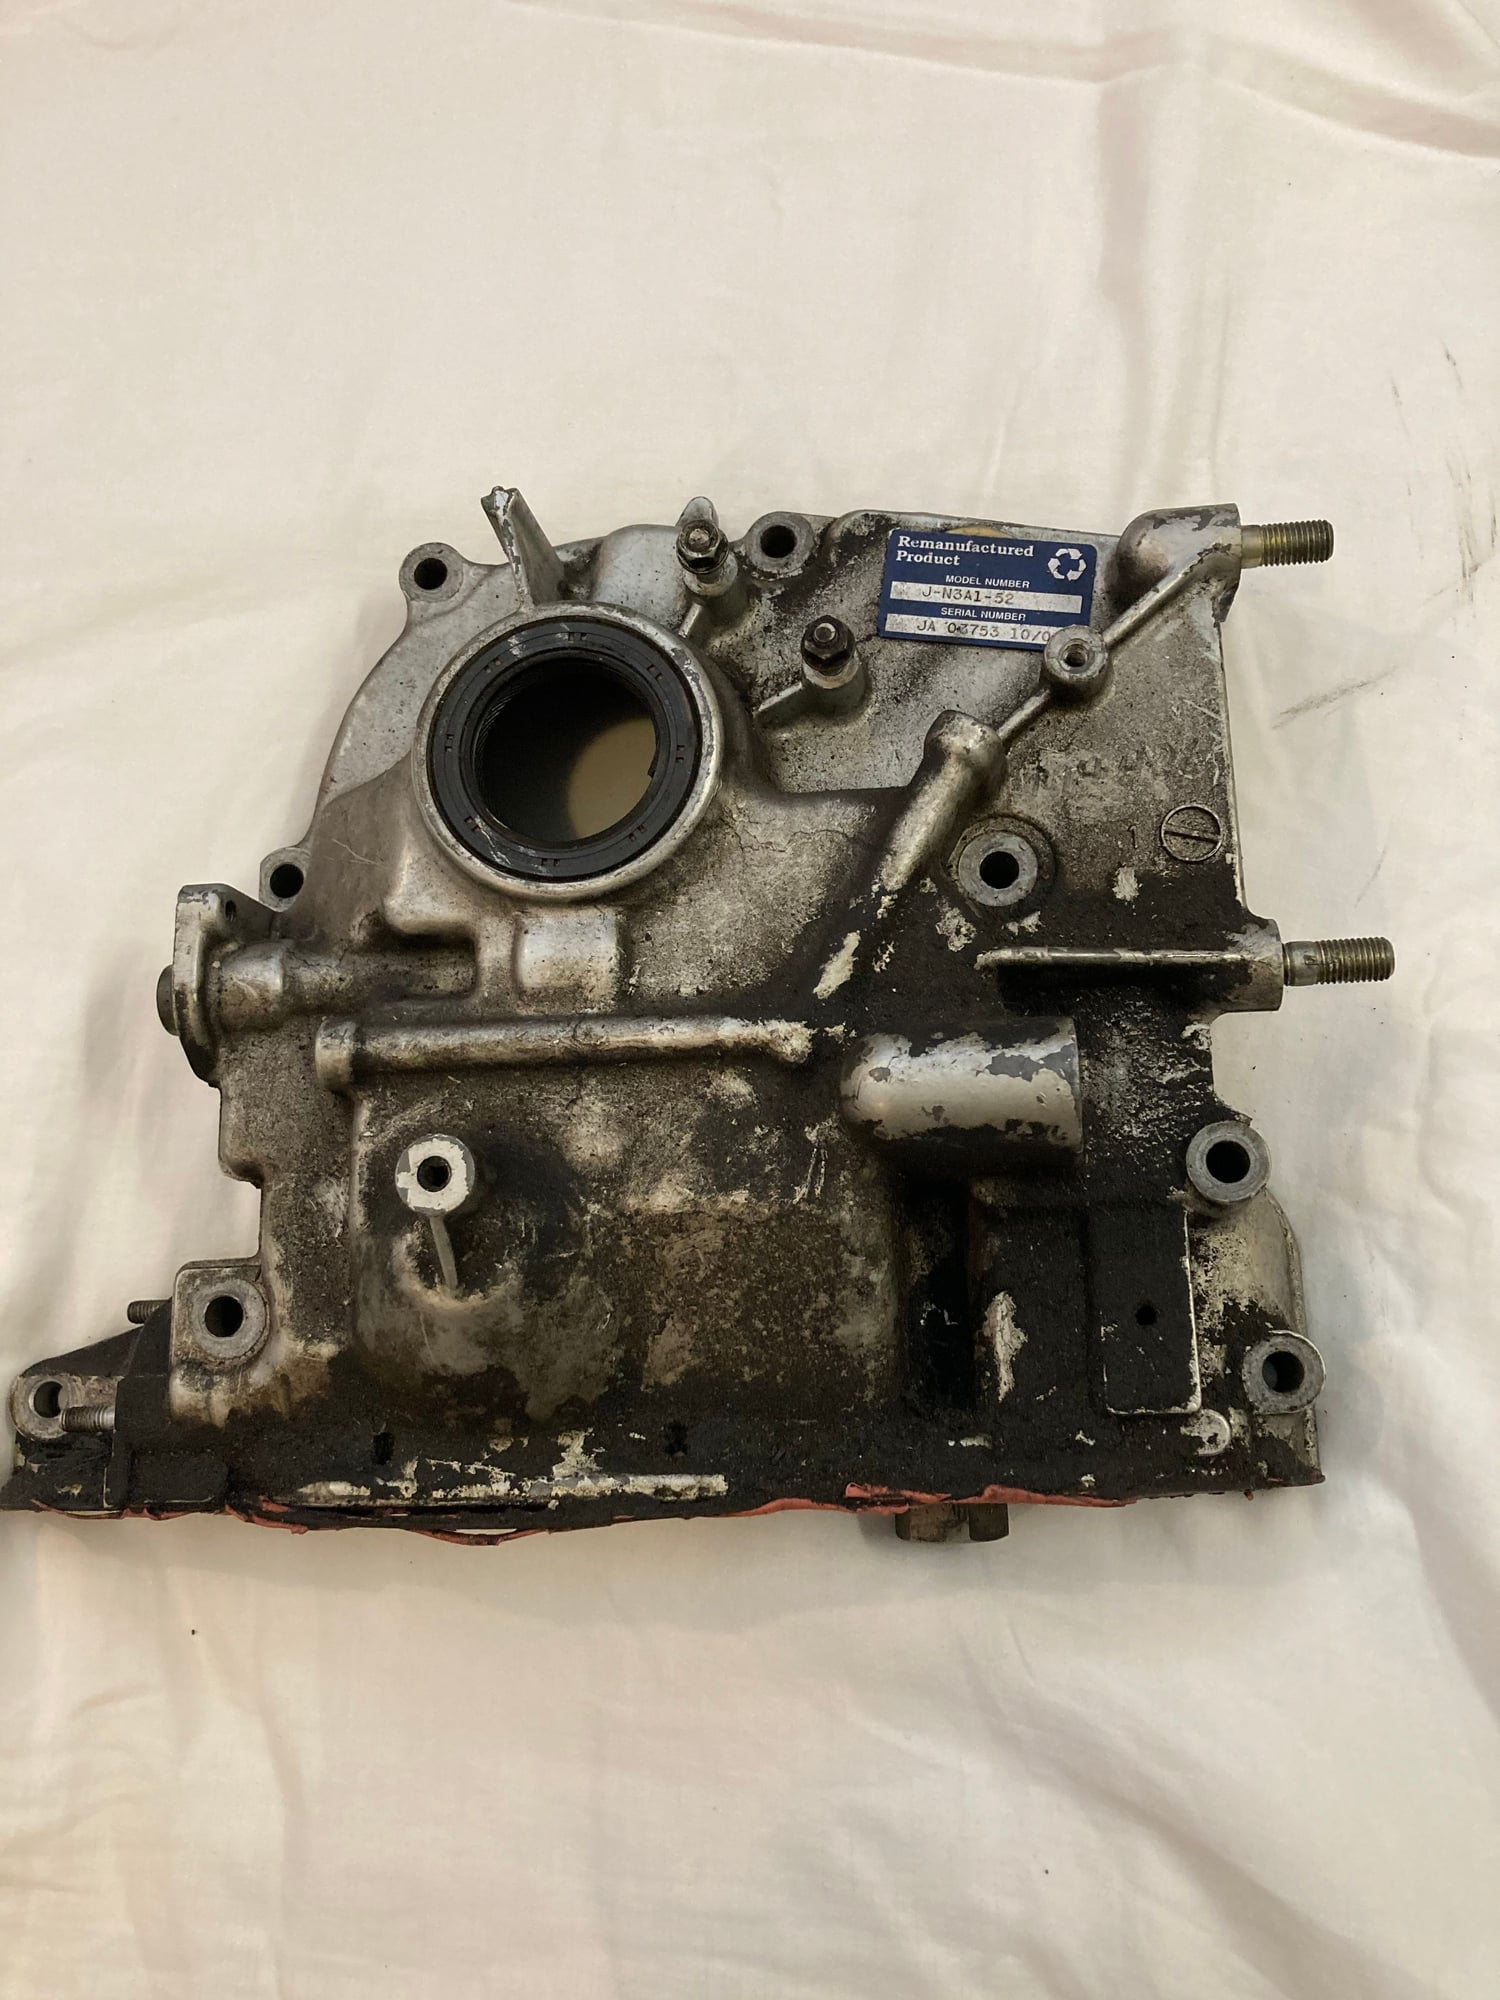 Engine - Internals - Engine front cover - Used - 1993 to 2002 Mazda RX-7 - Birmingham, AL 35226, United States